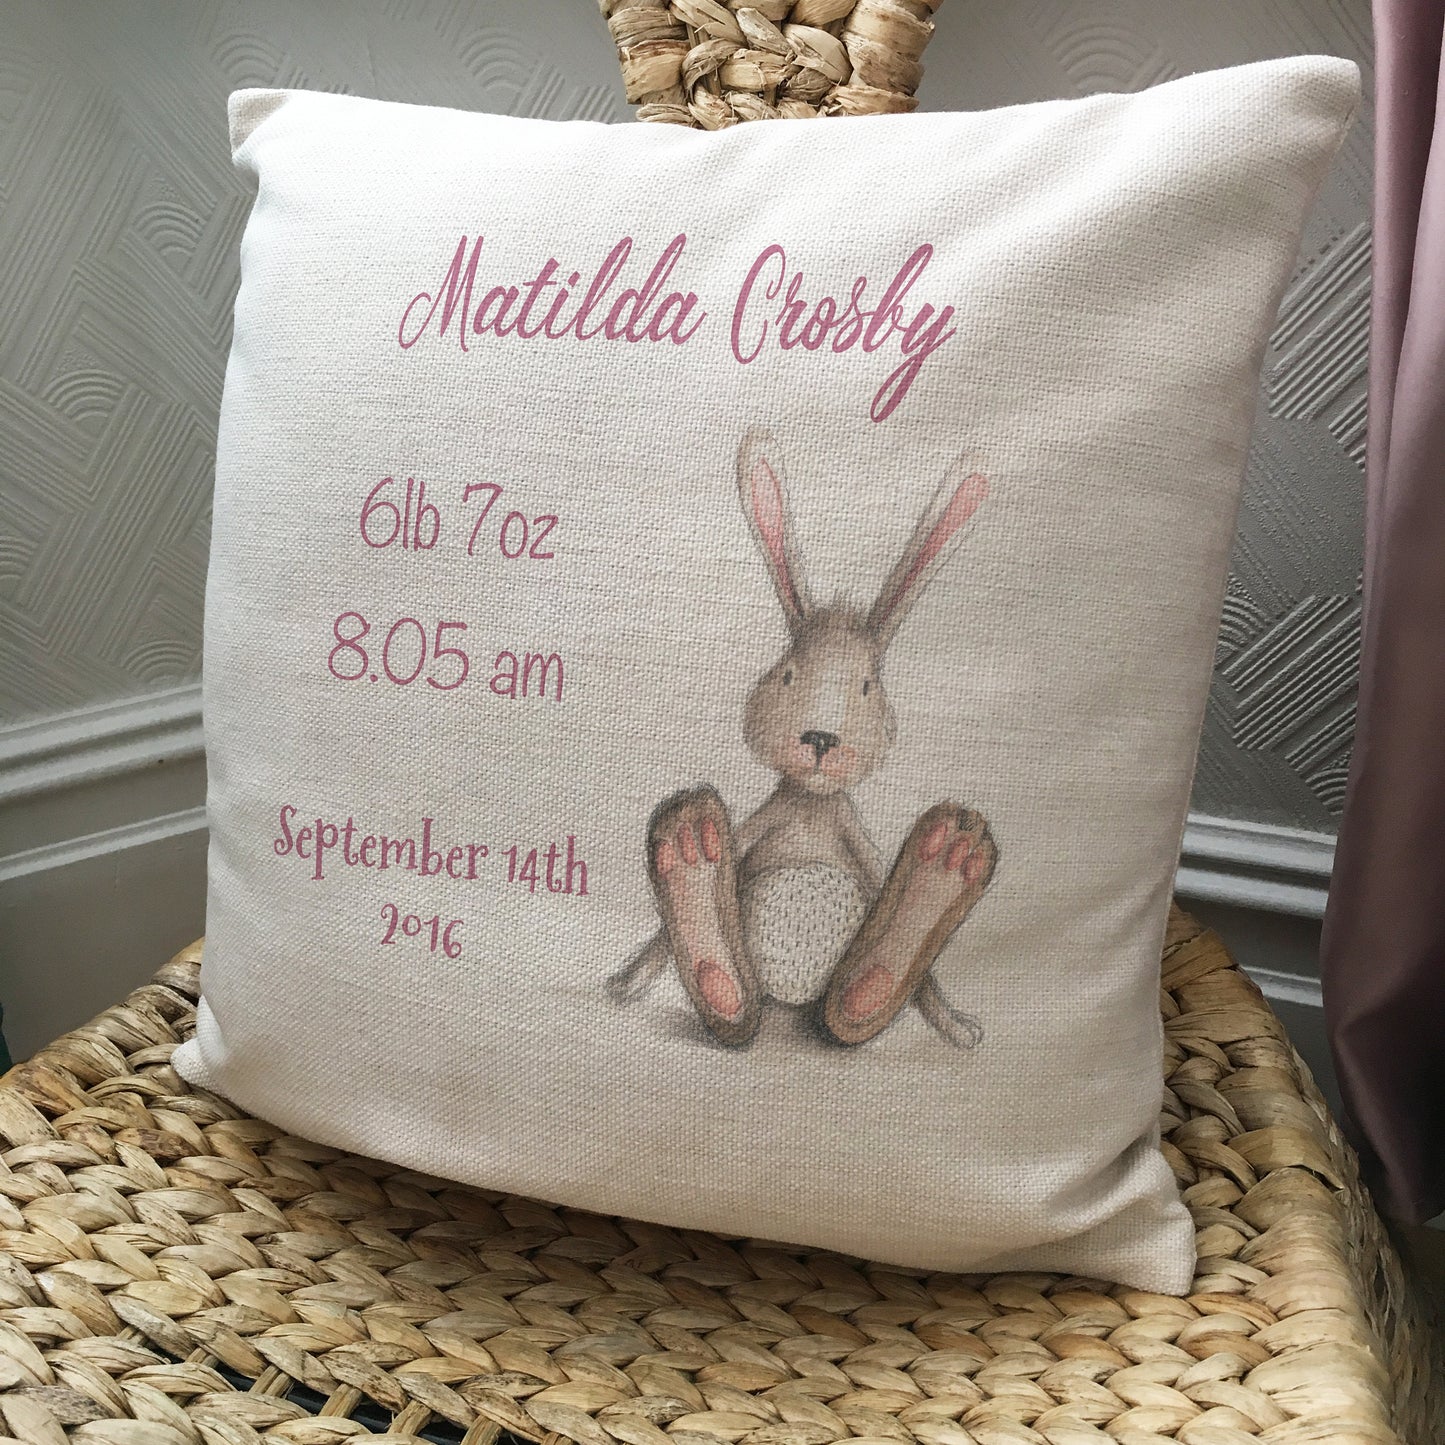 Personalised new baby christening birthday cushion cover gift bunny rabbit design on chair